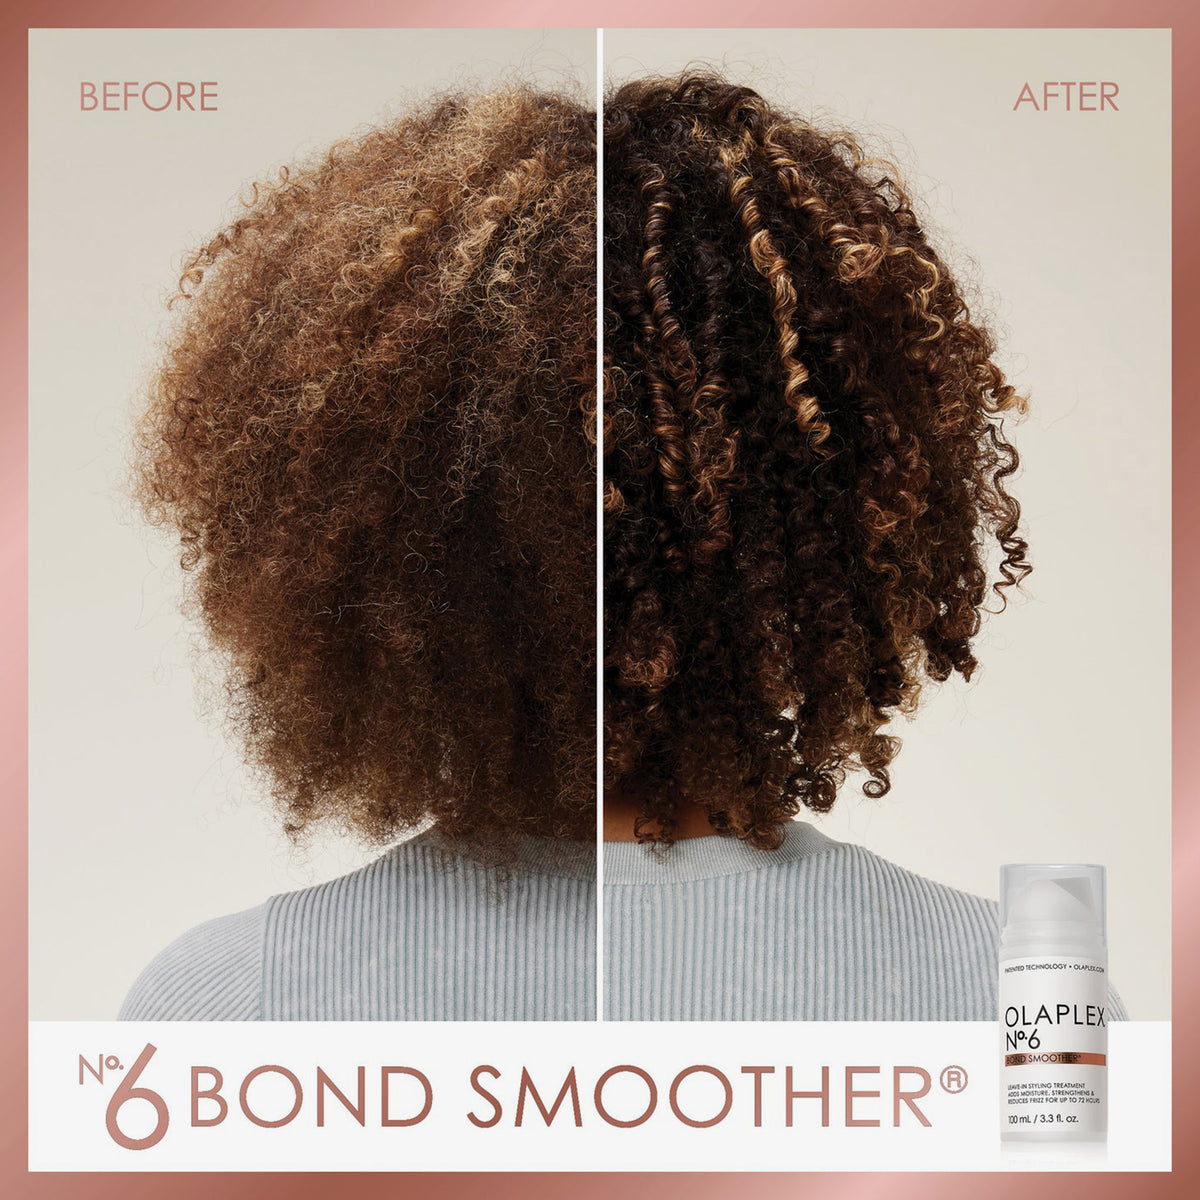 N°6 Bond Smoother